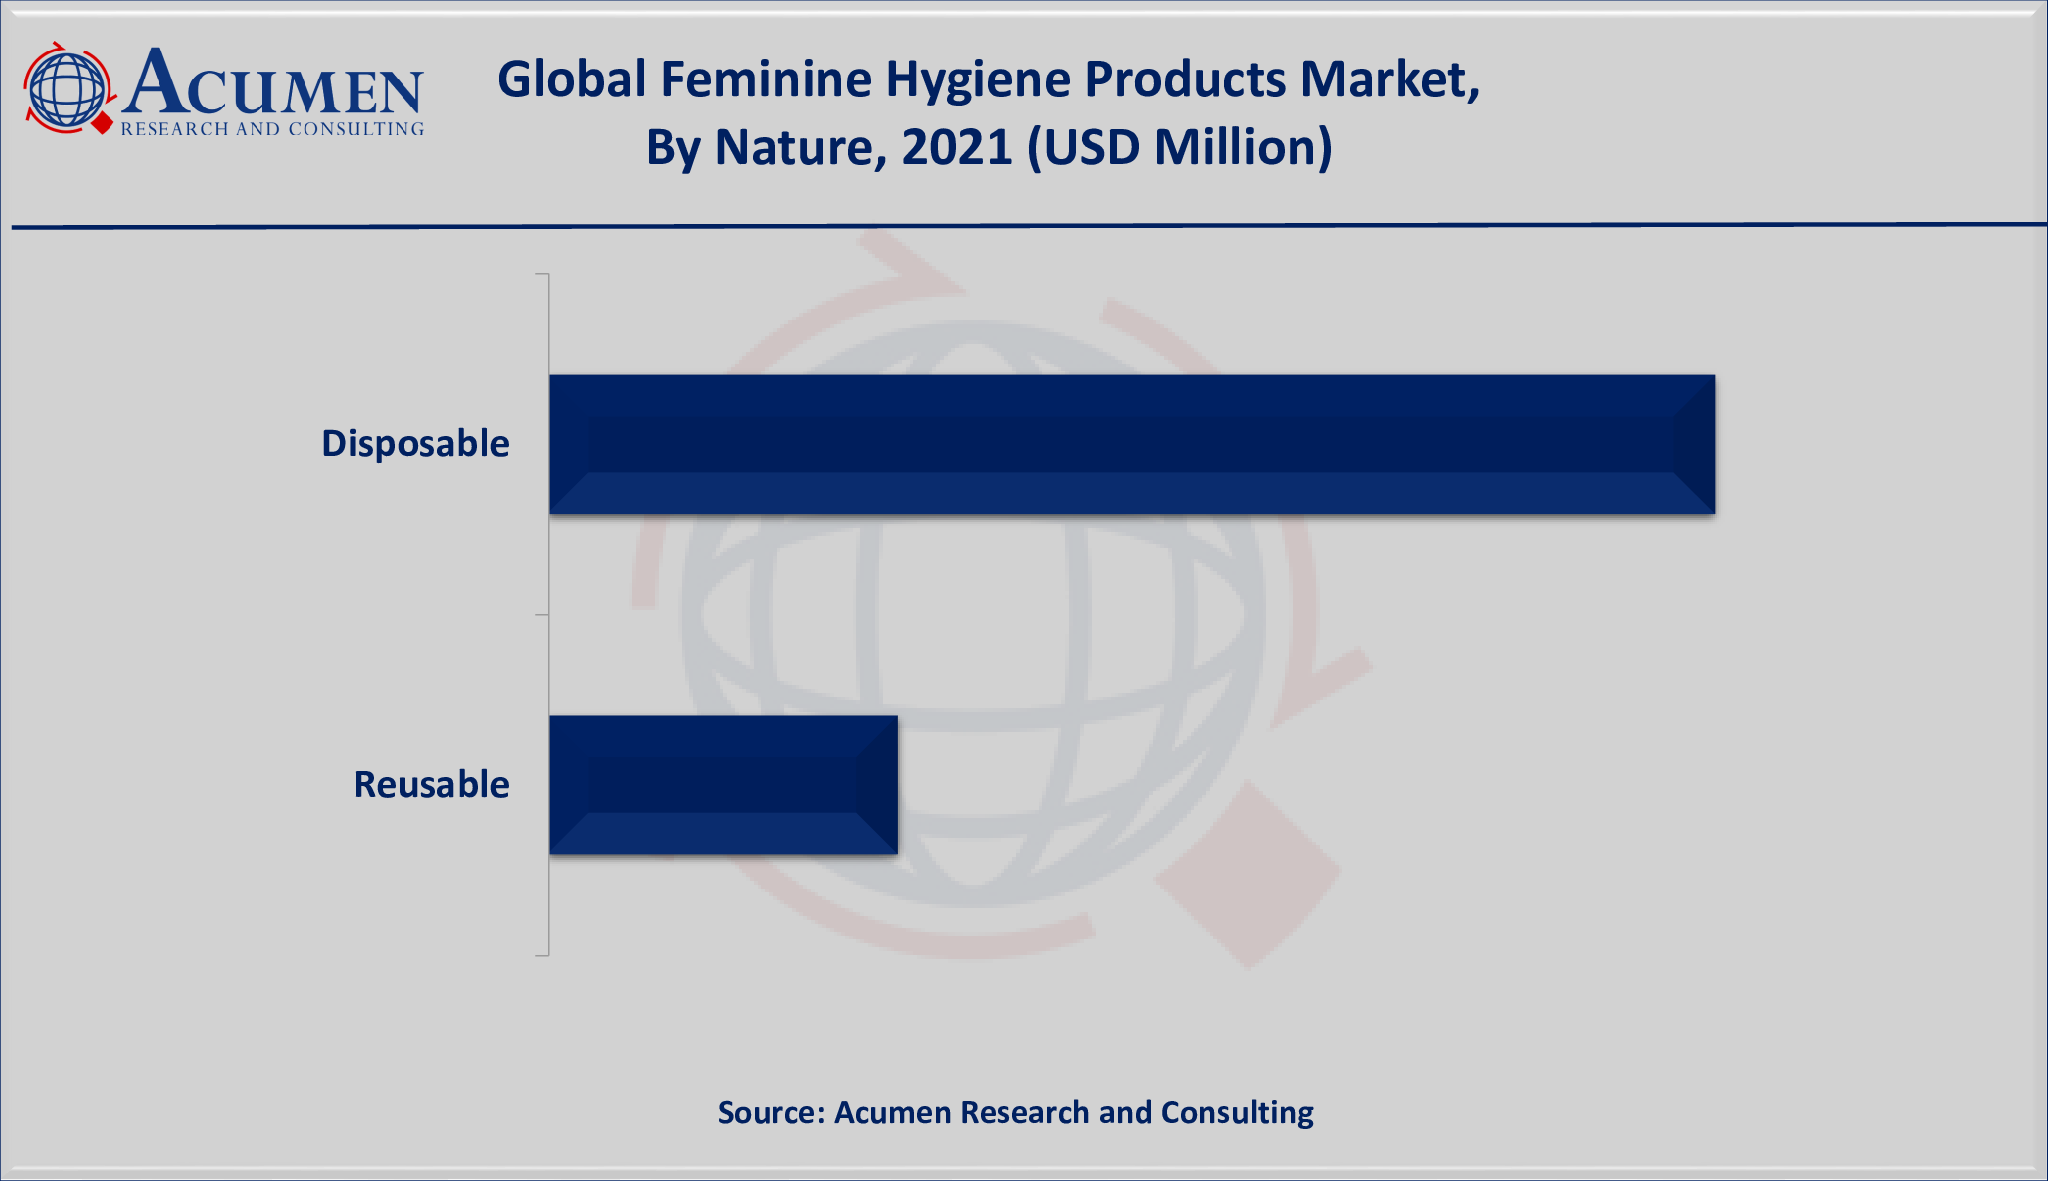 Global Feminine Hygiene Products Market Share And Size